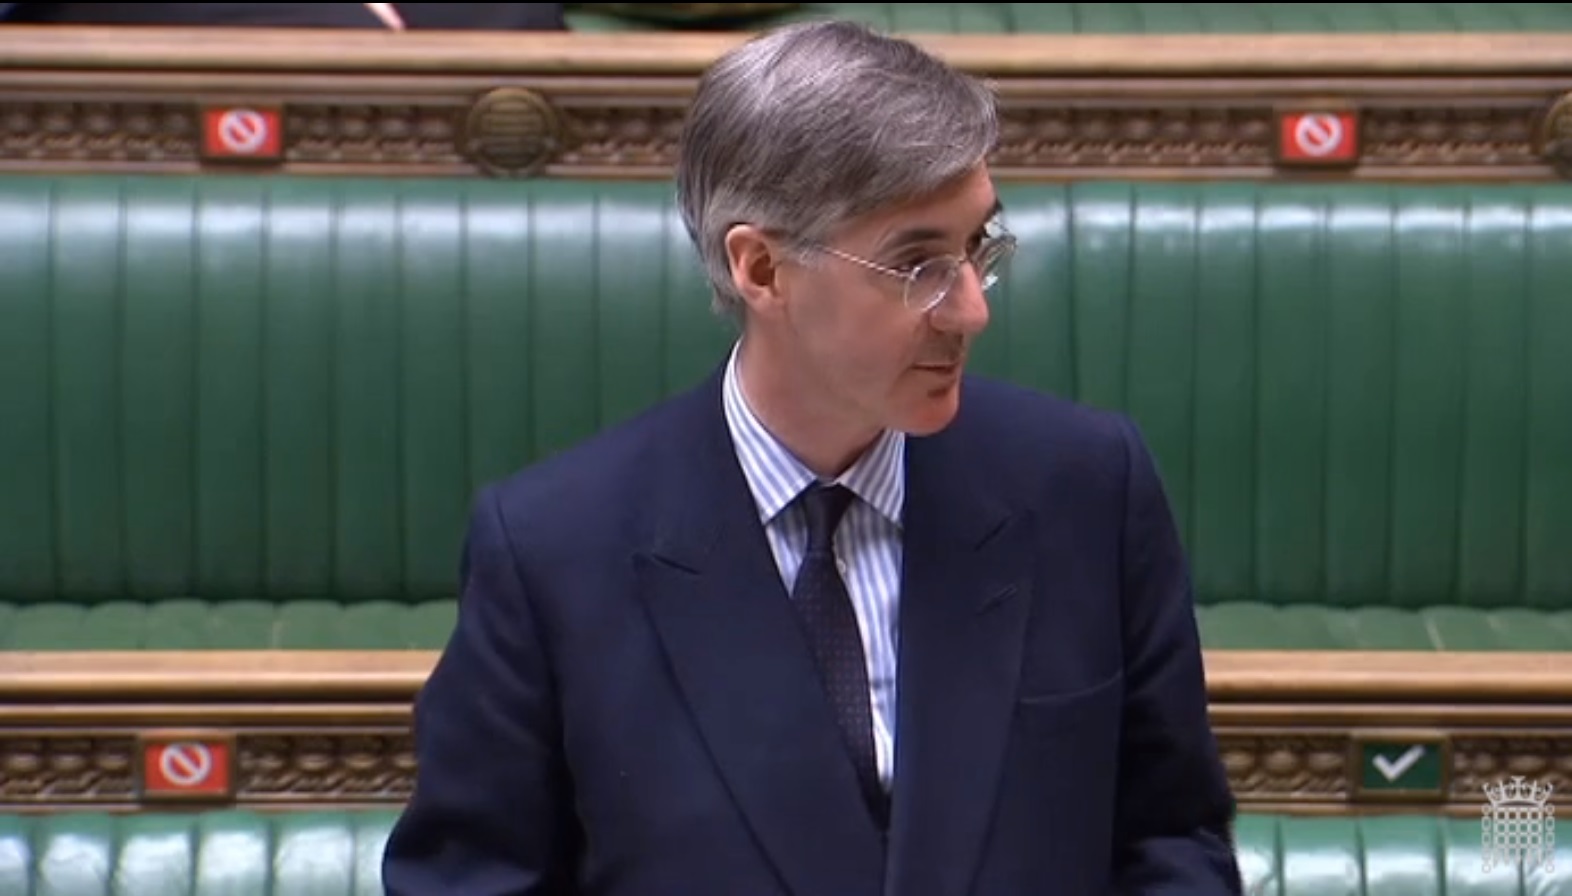 Jacob Rees-Mogg has abolished remote voting for MPs